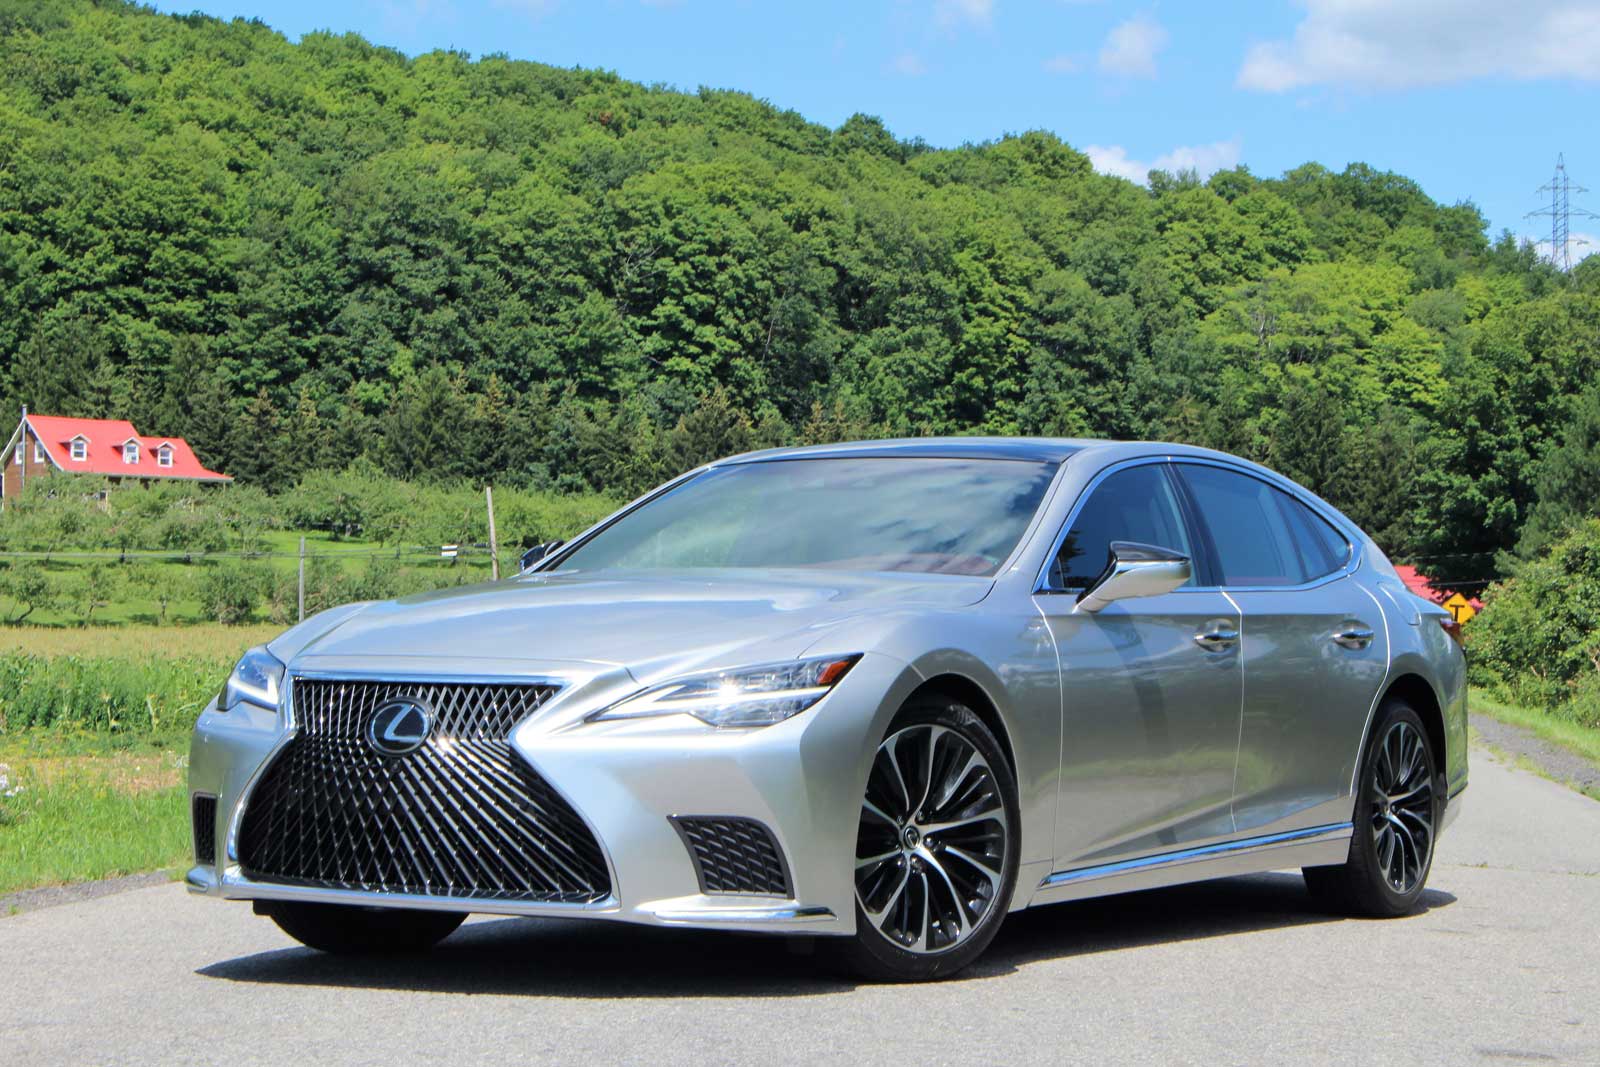 Should You Buy a 2021 Lexus LS? - Motor Illustrated